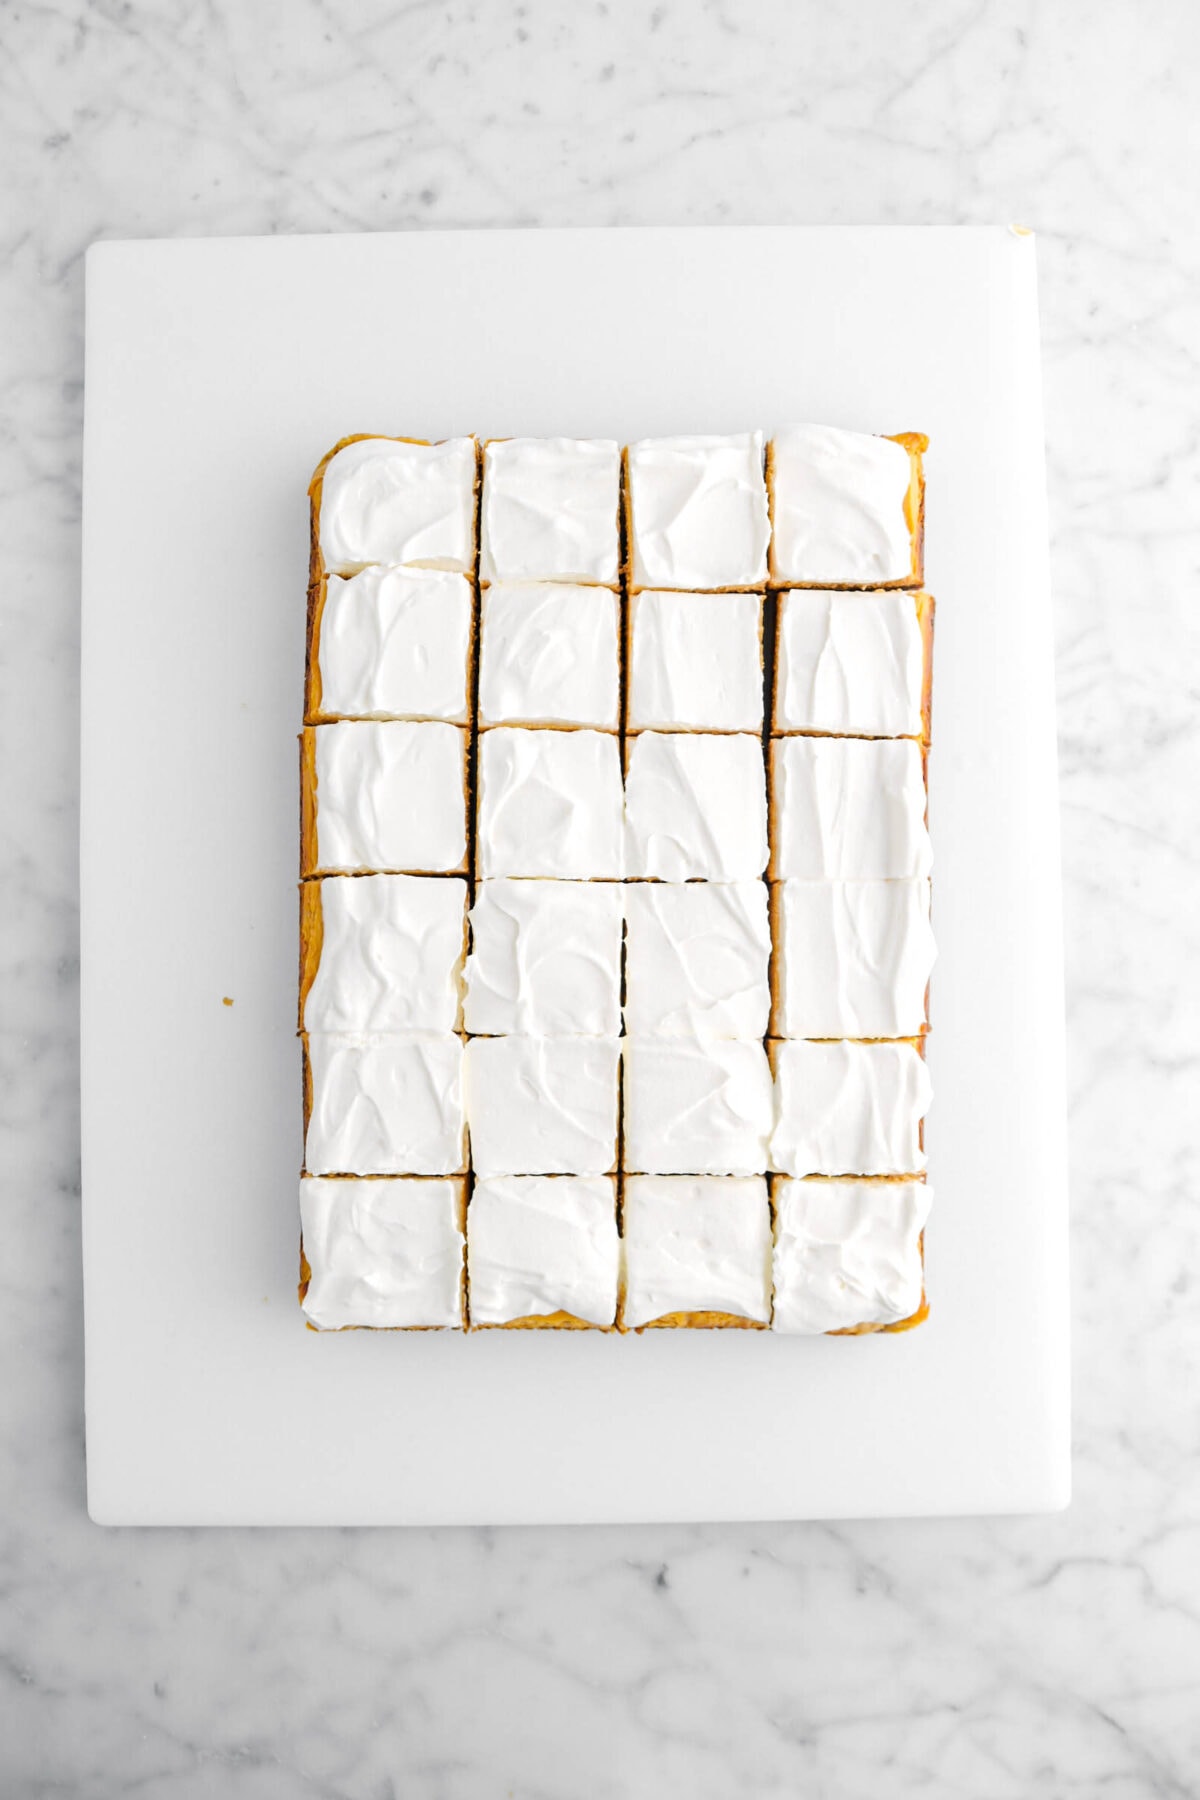 pumpkin cheesecake with whipped cream on top cut into twenty four bars on white cutting board.